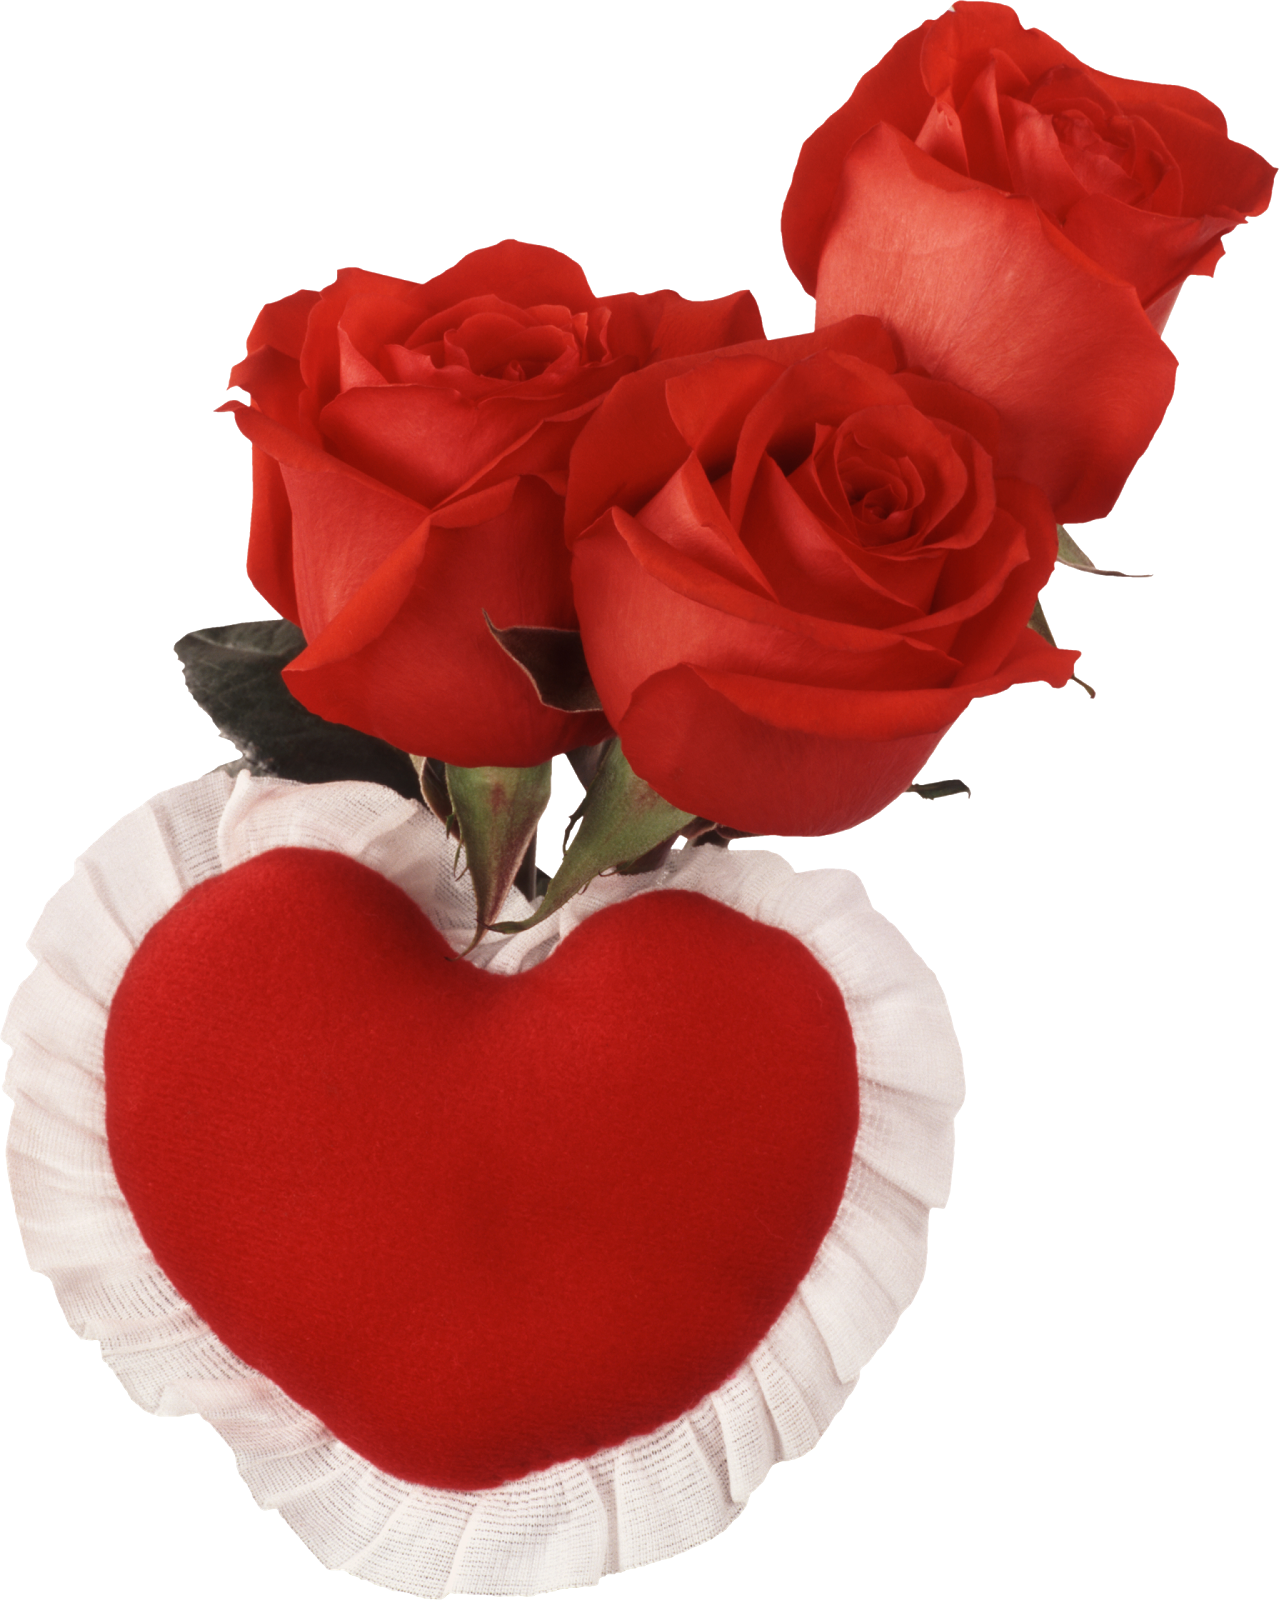 Red Heart And Roses - Love You Images With Name (1279x1600)